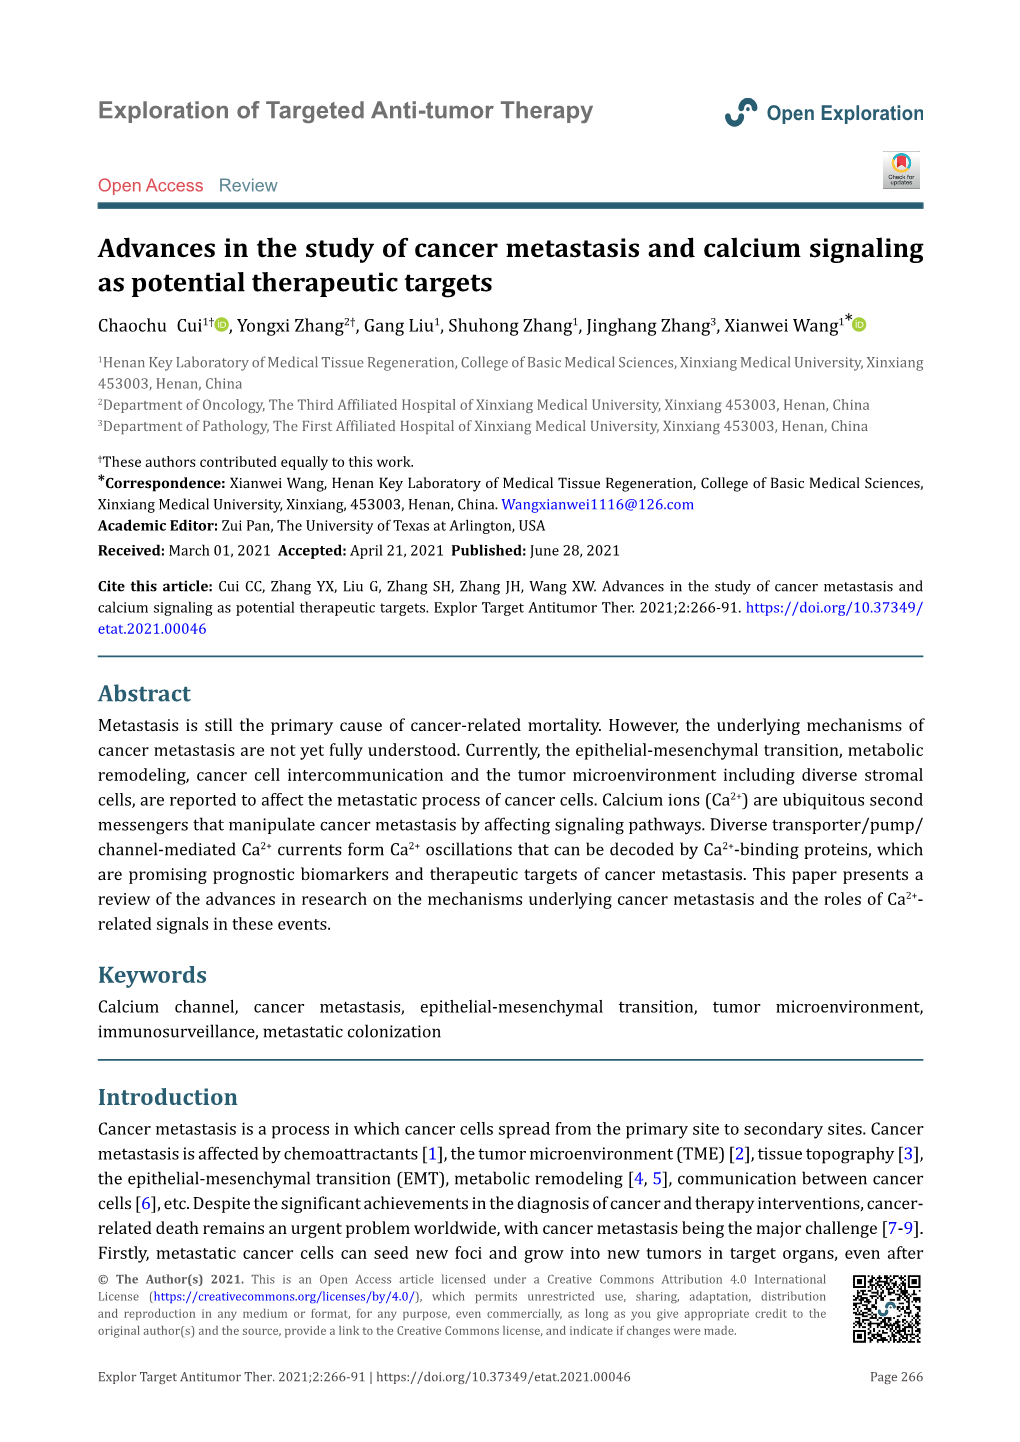 Advances in the Study of Cancer Metastasis and Calcium Signaling